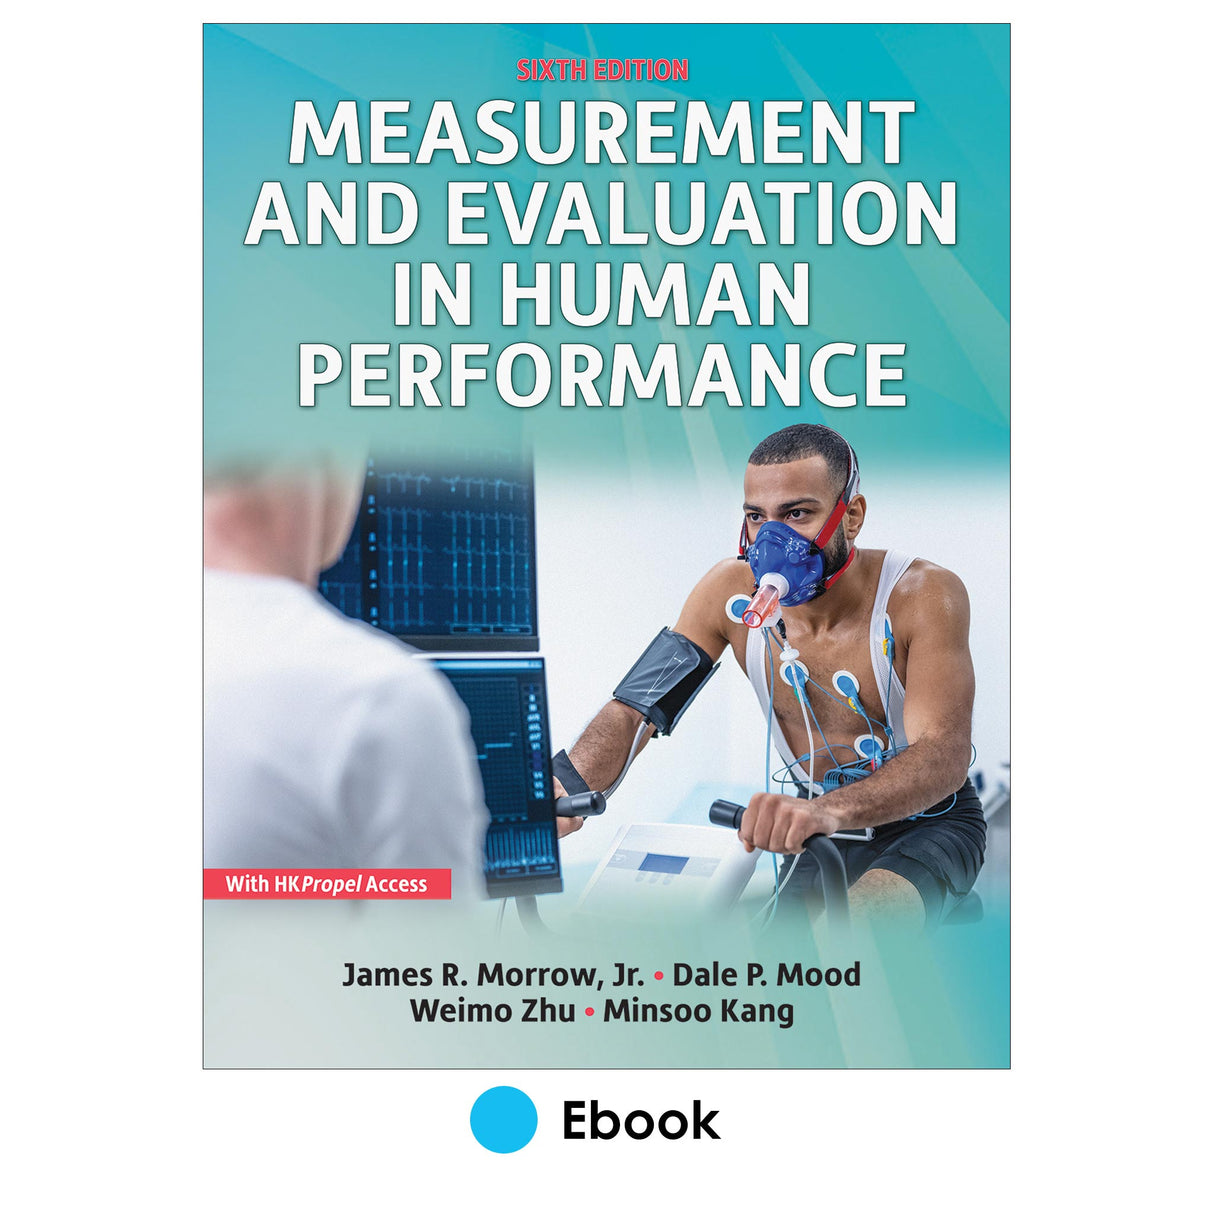 Measurement and Evaluation in Human Performance 6th Edition Ebook With HKPropel Access